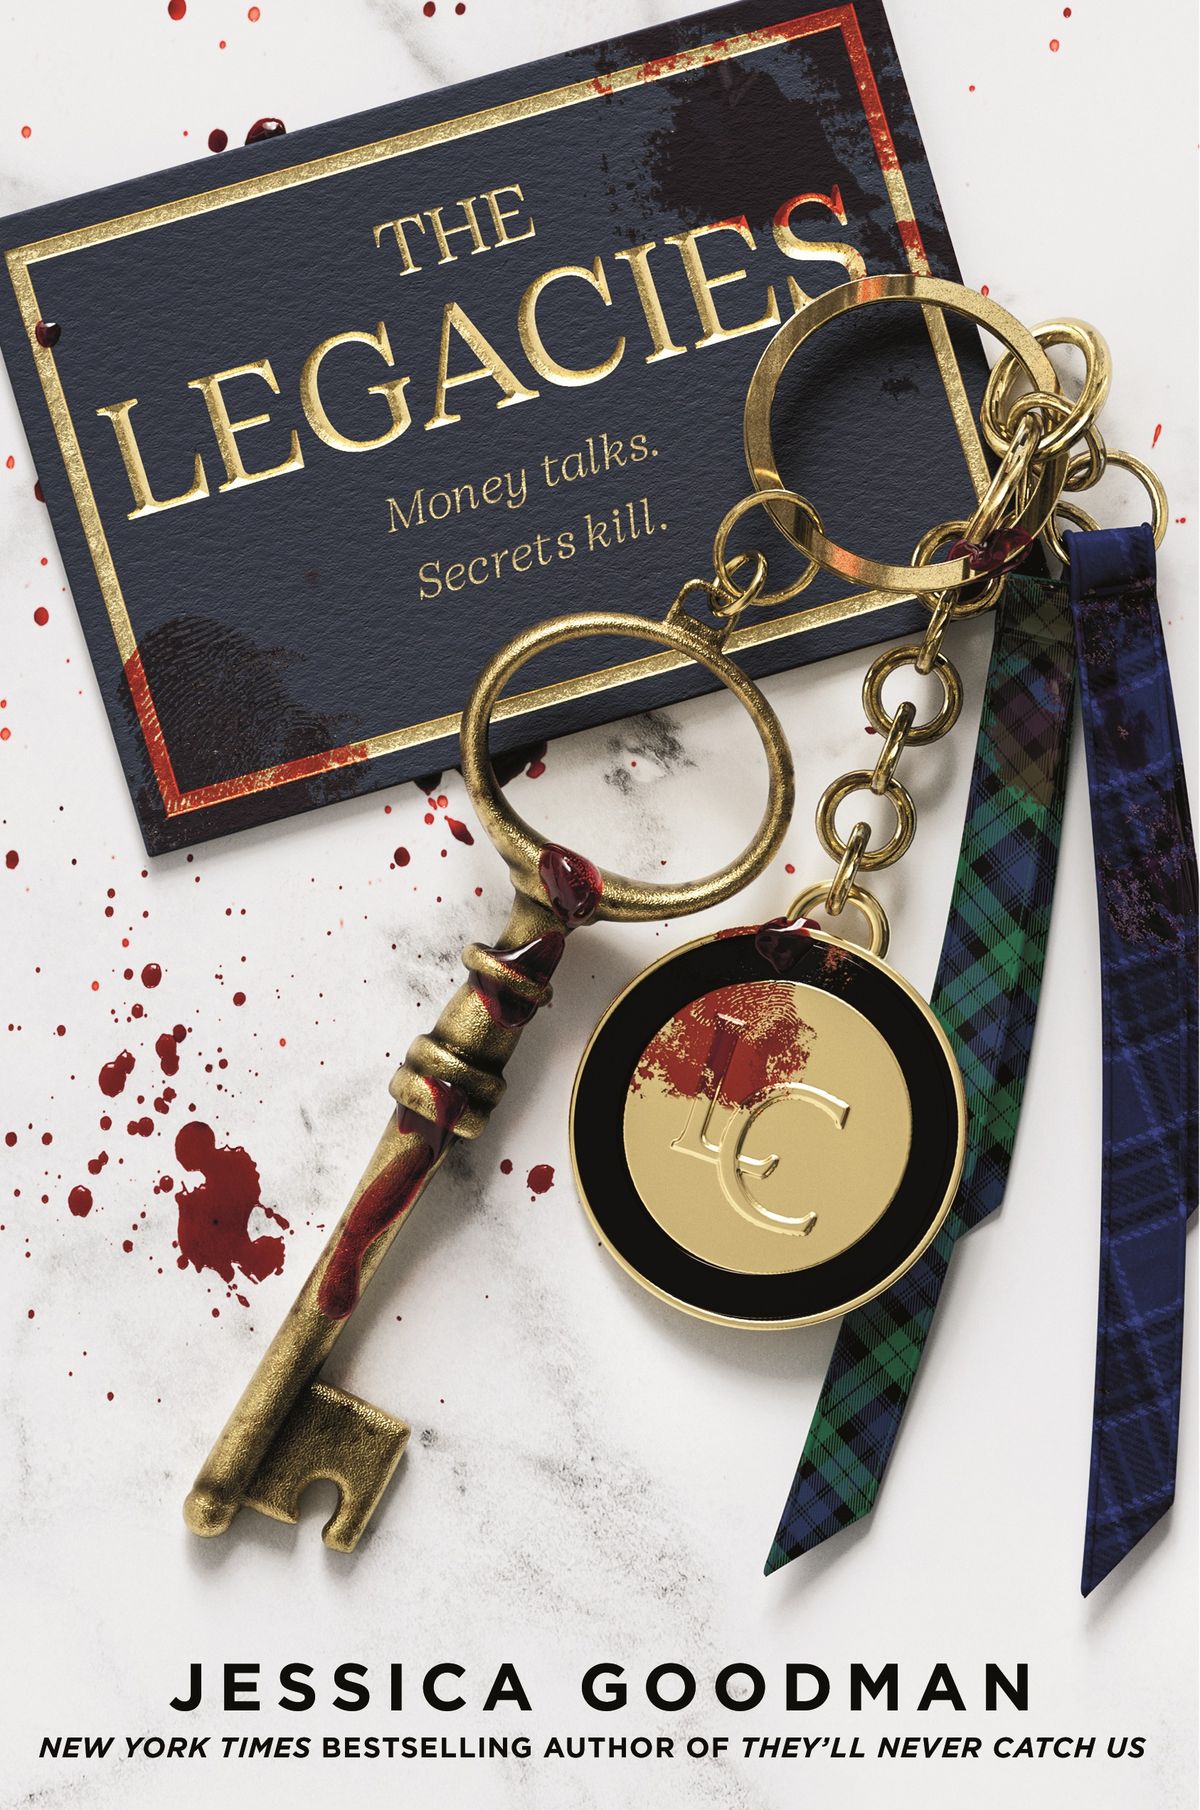 the legacies by jessica goodman book cover